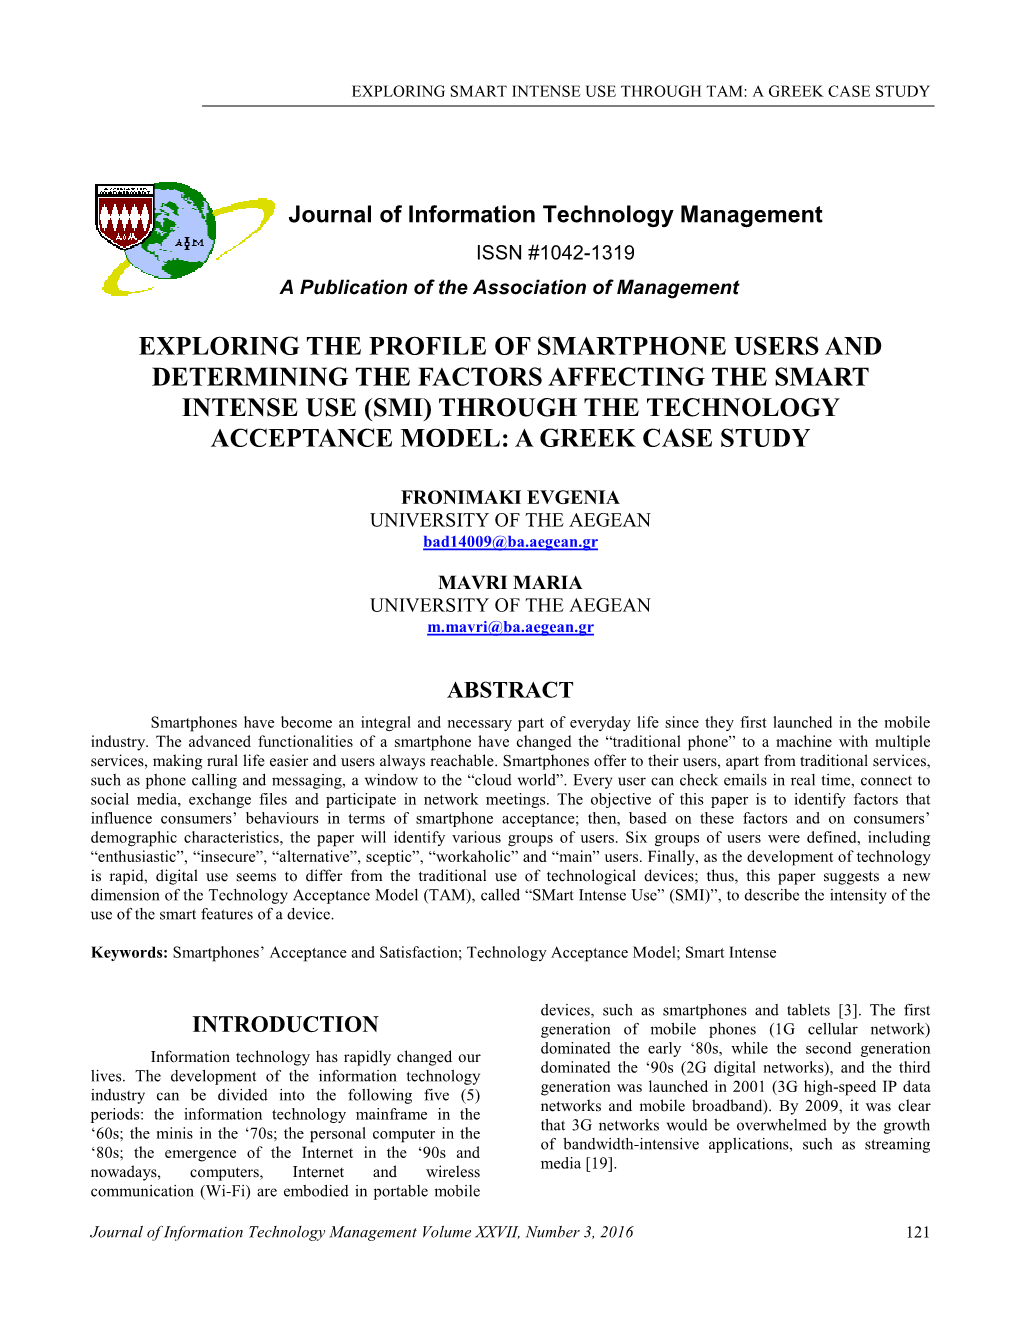 Exploring the Profile of Smartphone Users and Determining the Factors Affecting the Smart Intense